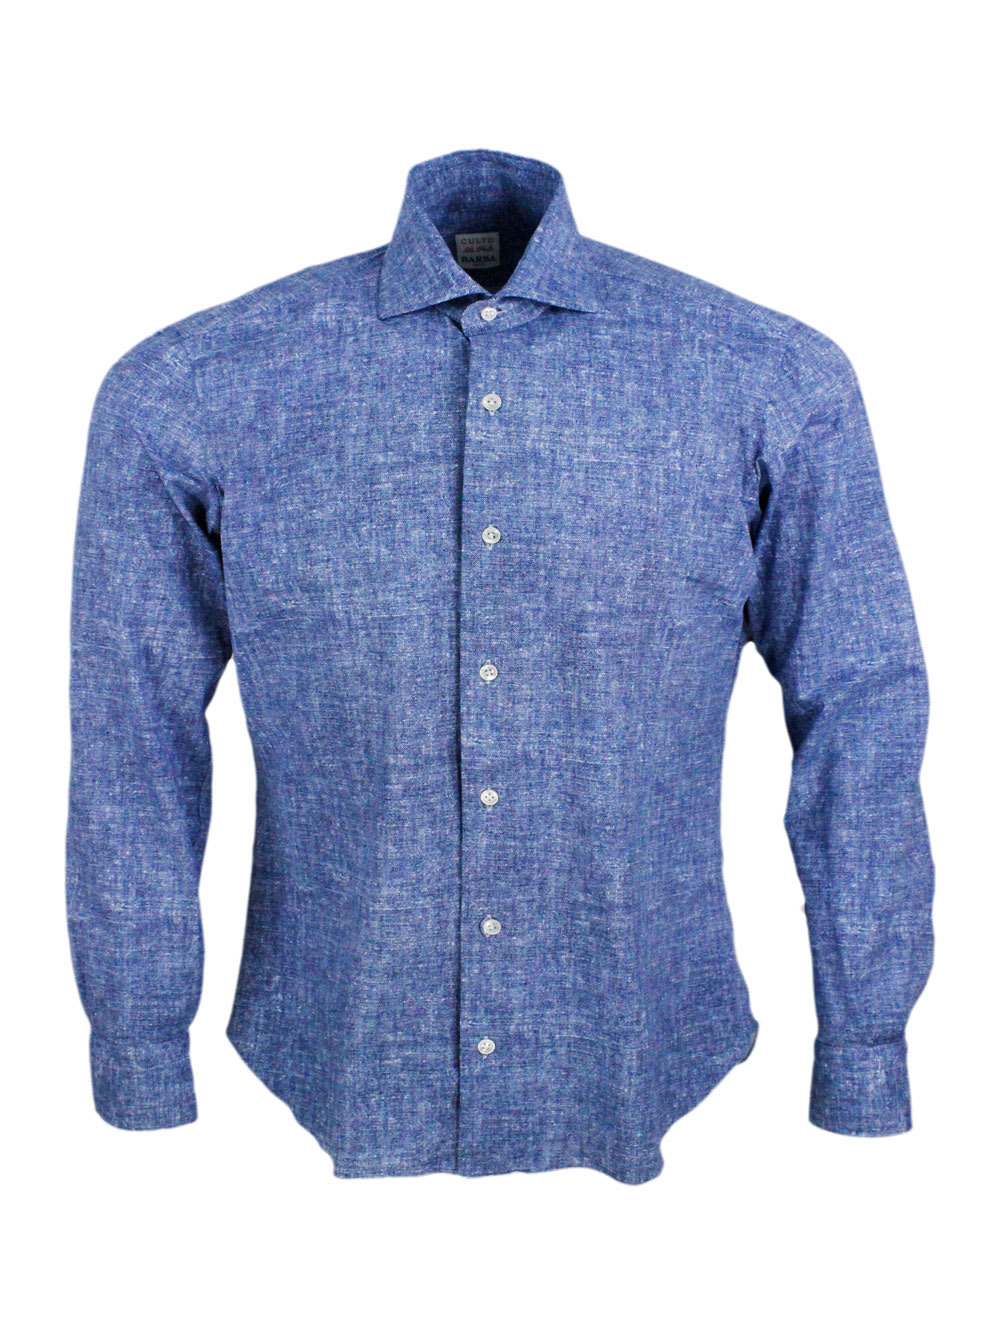 Cult Shirt In Super Stretch In Denim Melange Color With Mother-of-pearl Buttons And Italian Collar